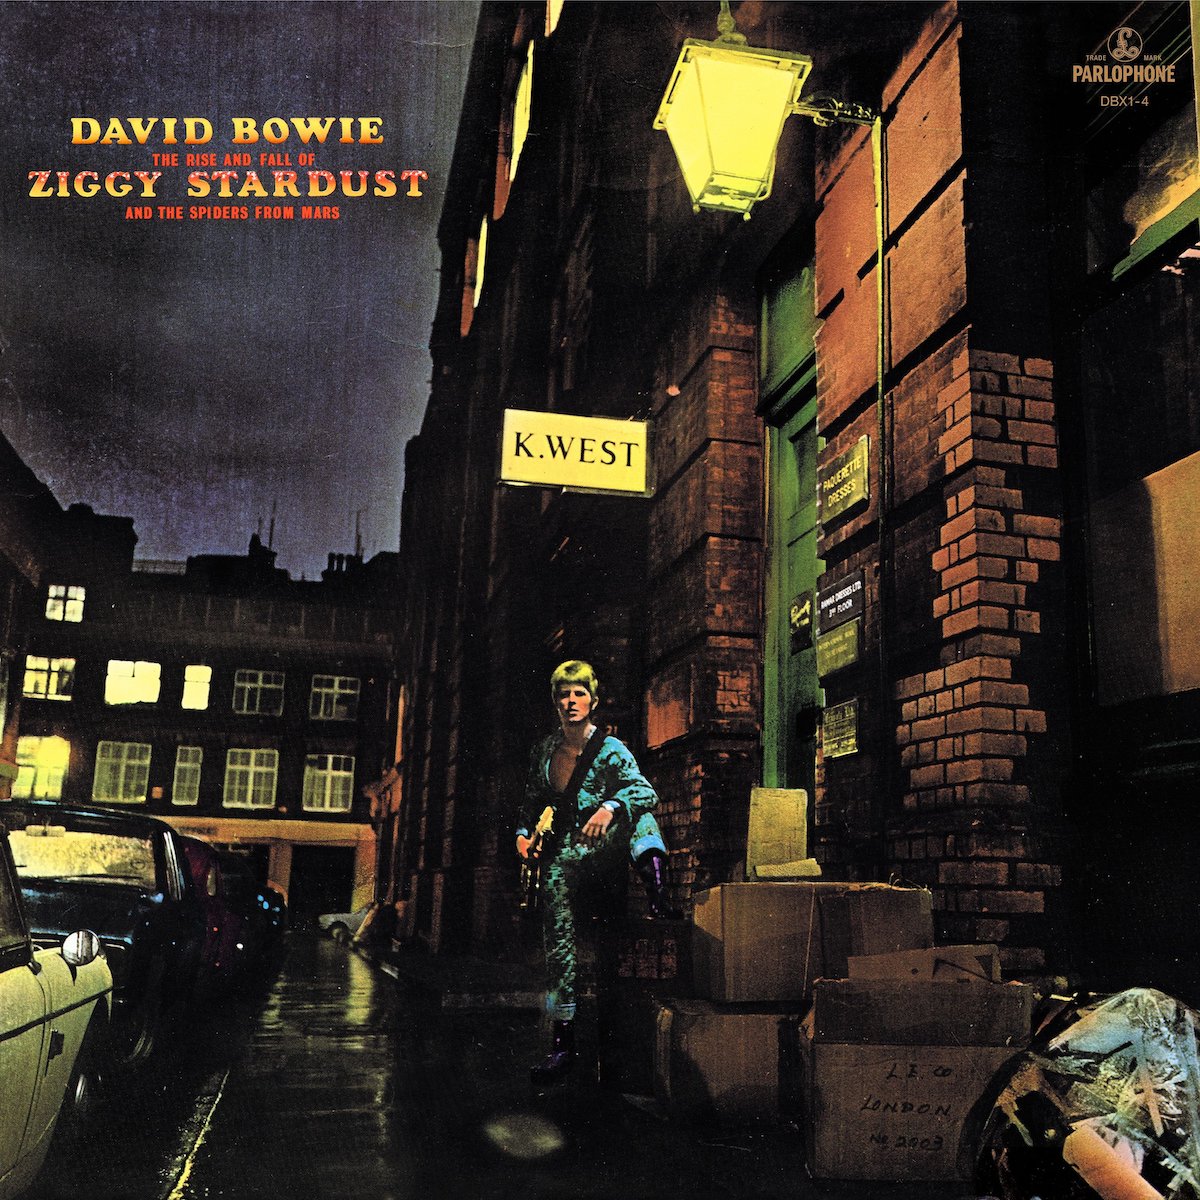 DAVID BOWIE - THE RISE AND FALL OF ZIGGY STARDUST (2022 HALF SPEED)